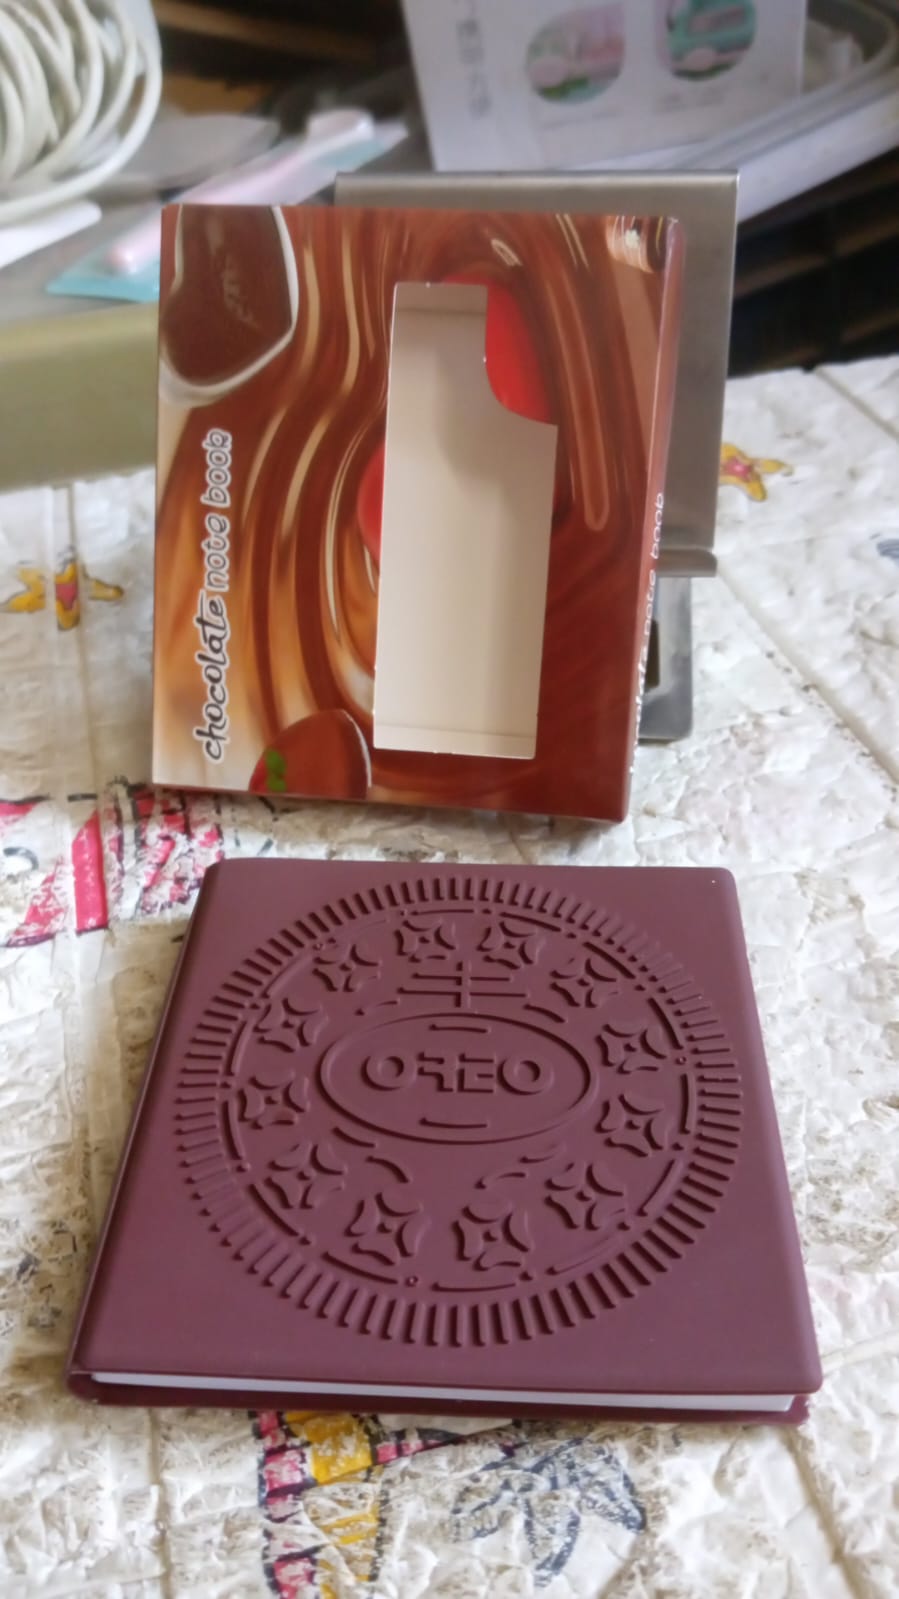 17670 Chocolate DiaryÂ Notebooks Original Chocolate Smell Writing Practice Book Early Learning Copybook Premium Chocolate Book (1Pc / Book / 80 Pages)Â 